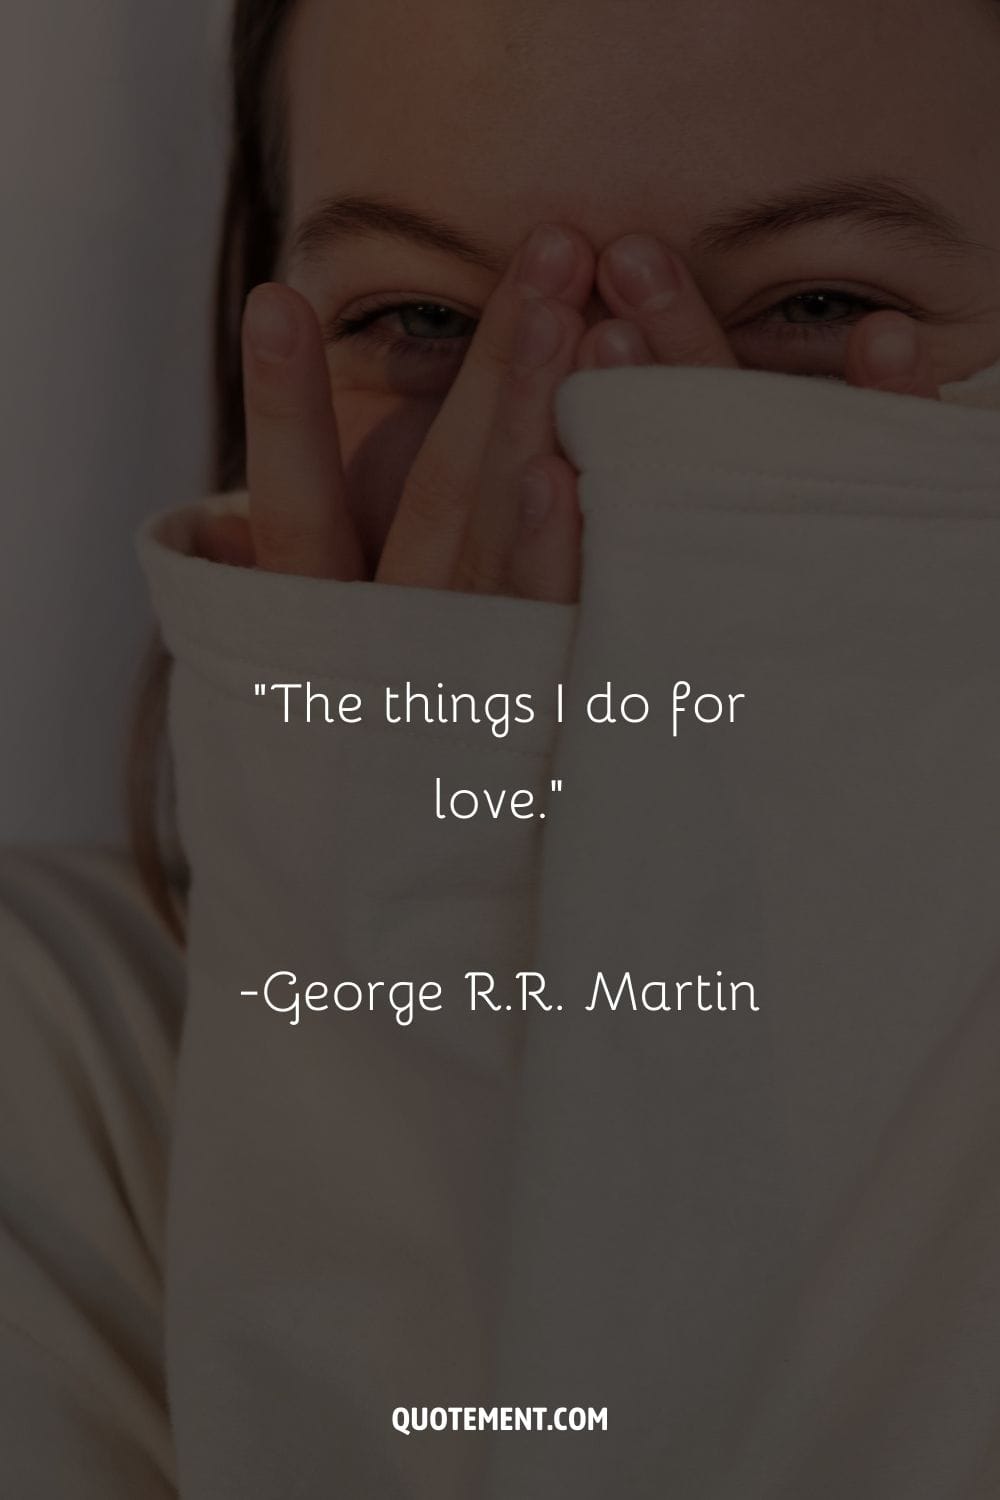 “The things I do for love.” ― George R.R. Martin, A Game of Thrones